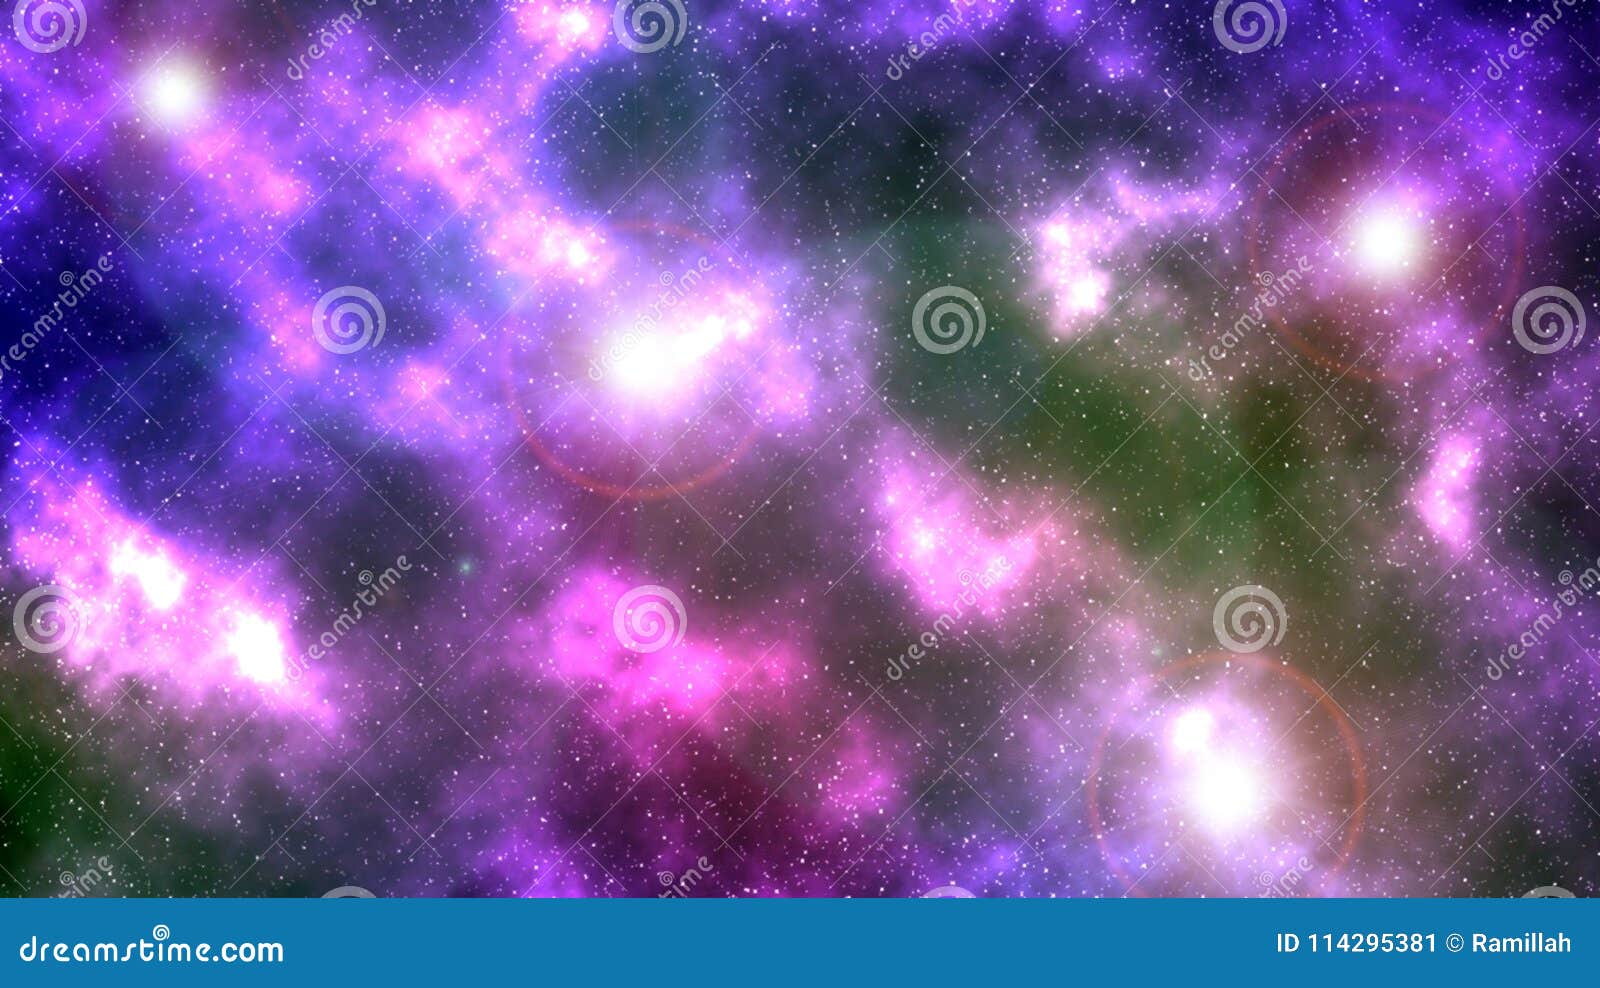 Digital Painting Colorful Abstract Galaxy Background Stock